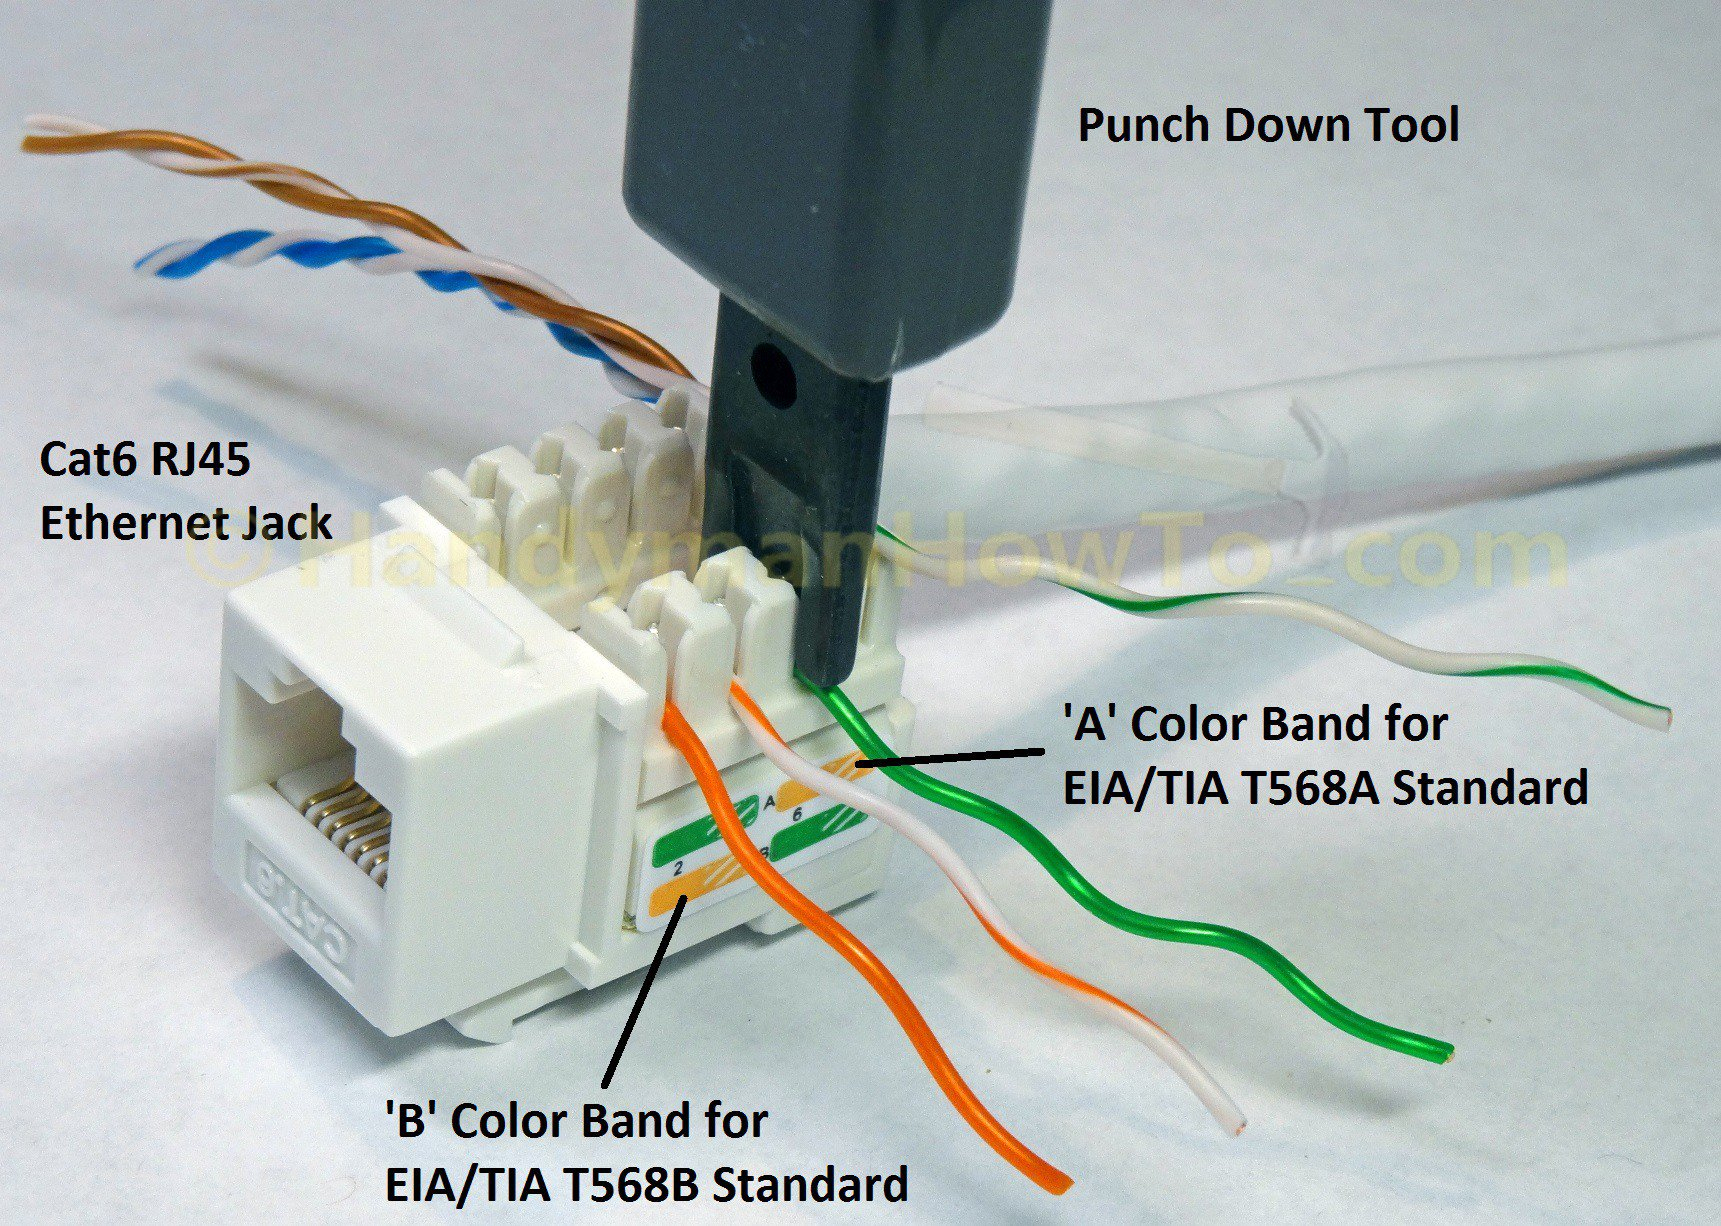 How To Wire A Cat6 Rj45 Ethernet Jack - Handymanhowto - Cat 6 Wiring Diagram For Wall Plates